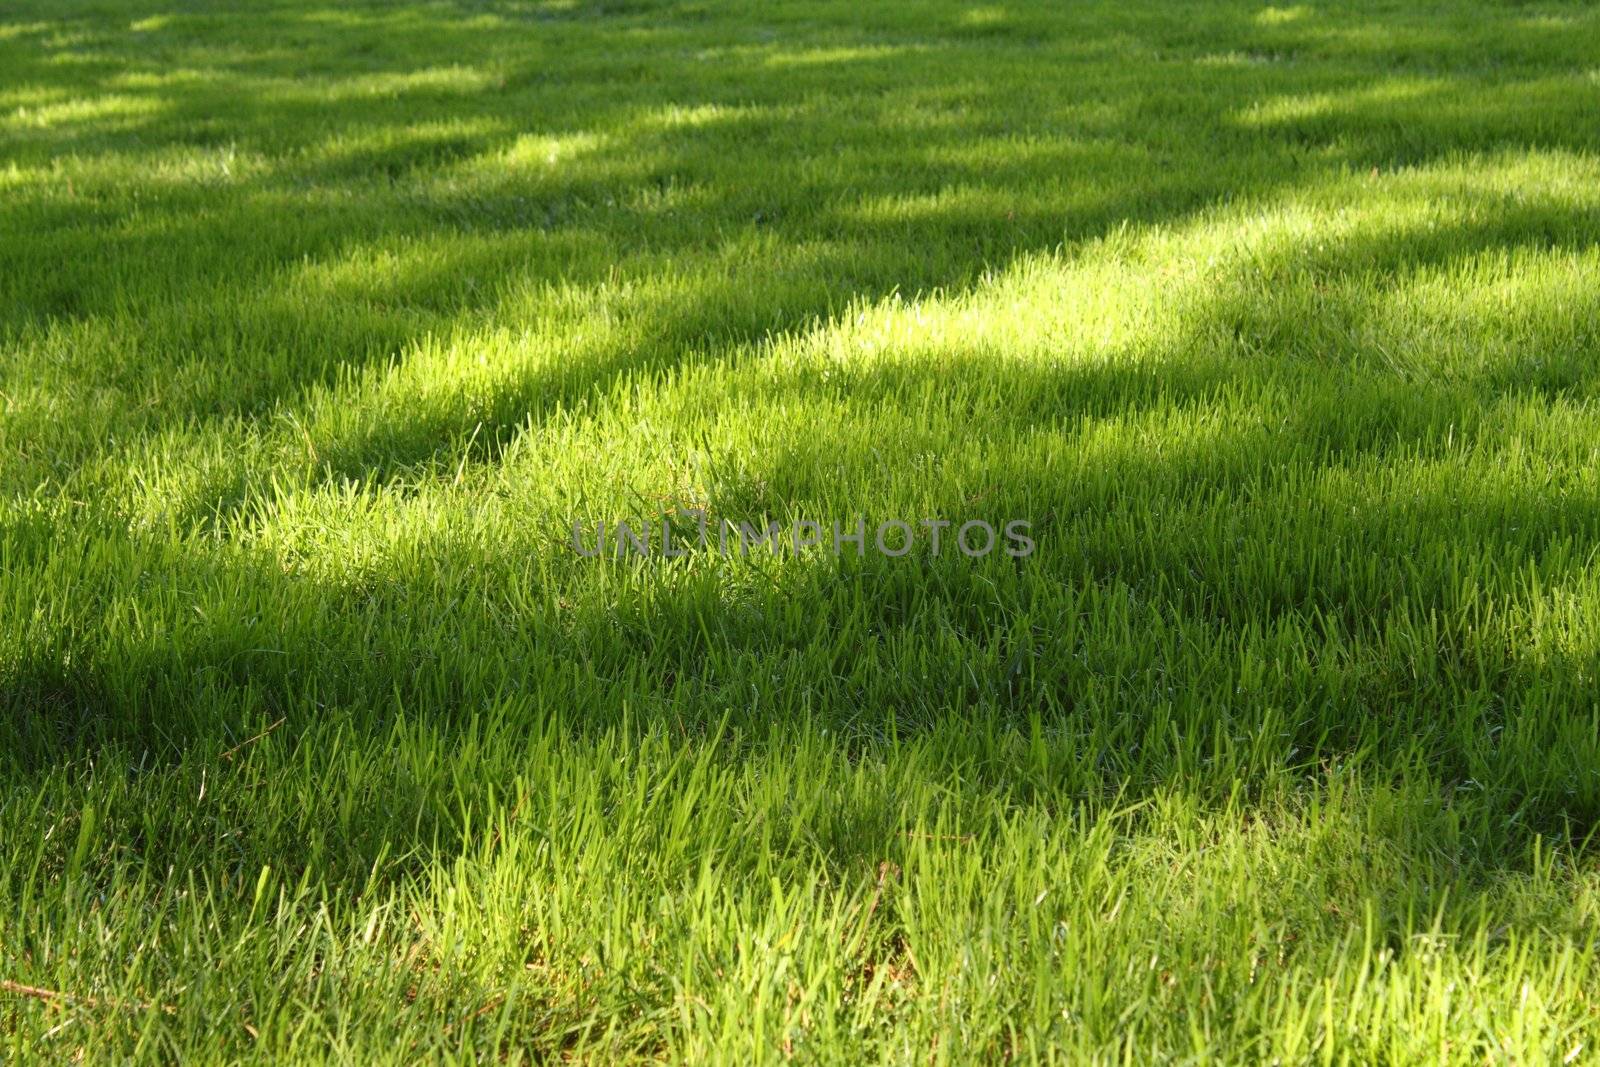 Grass with sunny spots